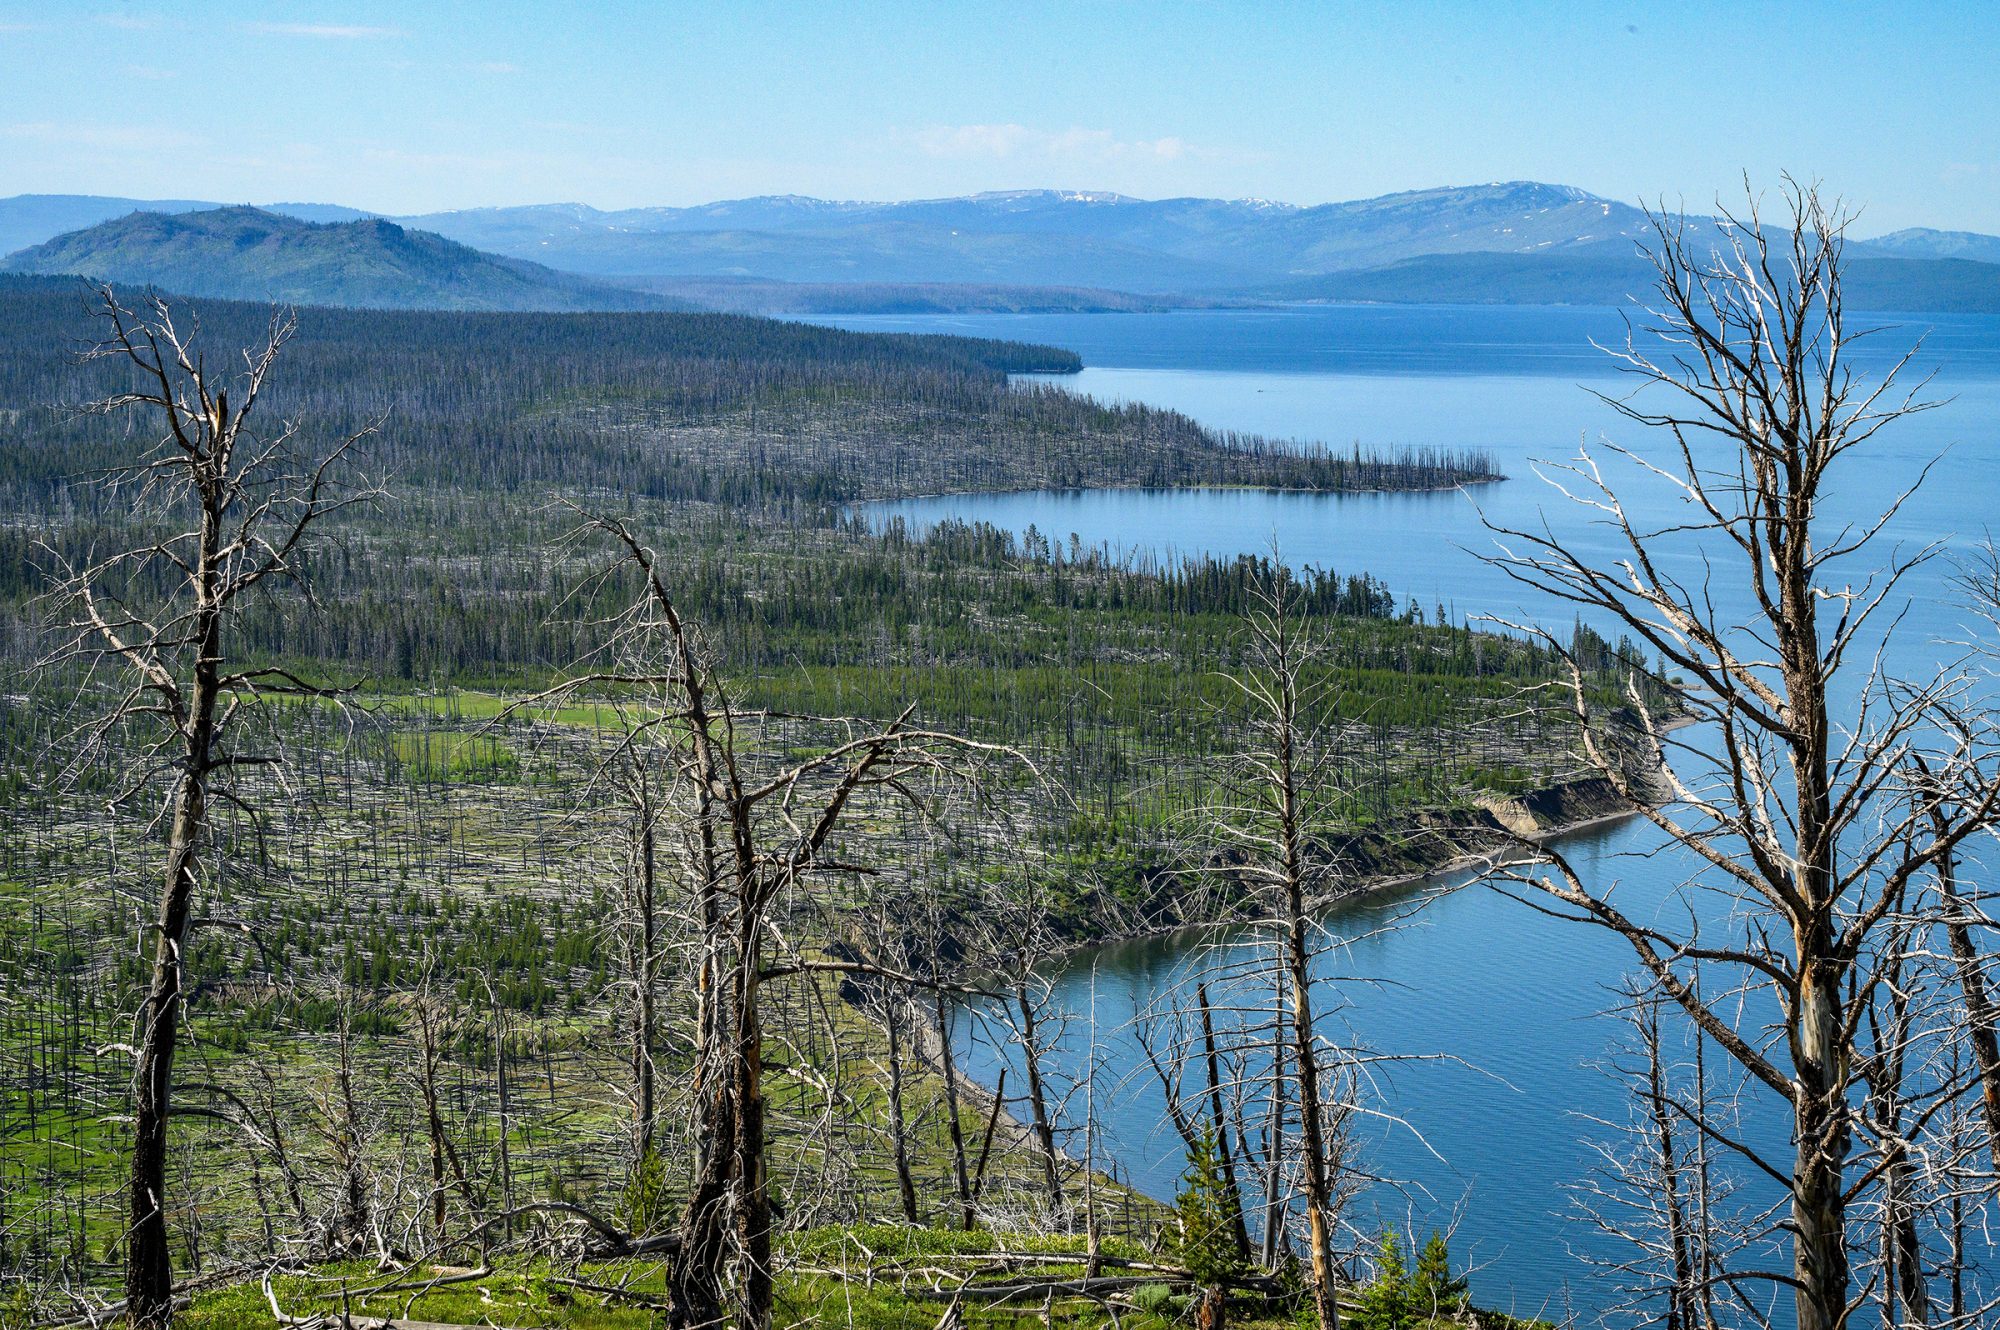 A vista showing Yellowstone Lake with mountains in the far distance and swaths of land burned by fire but now regrowing.